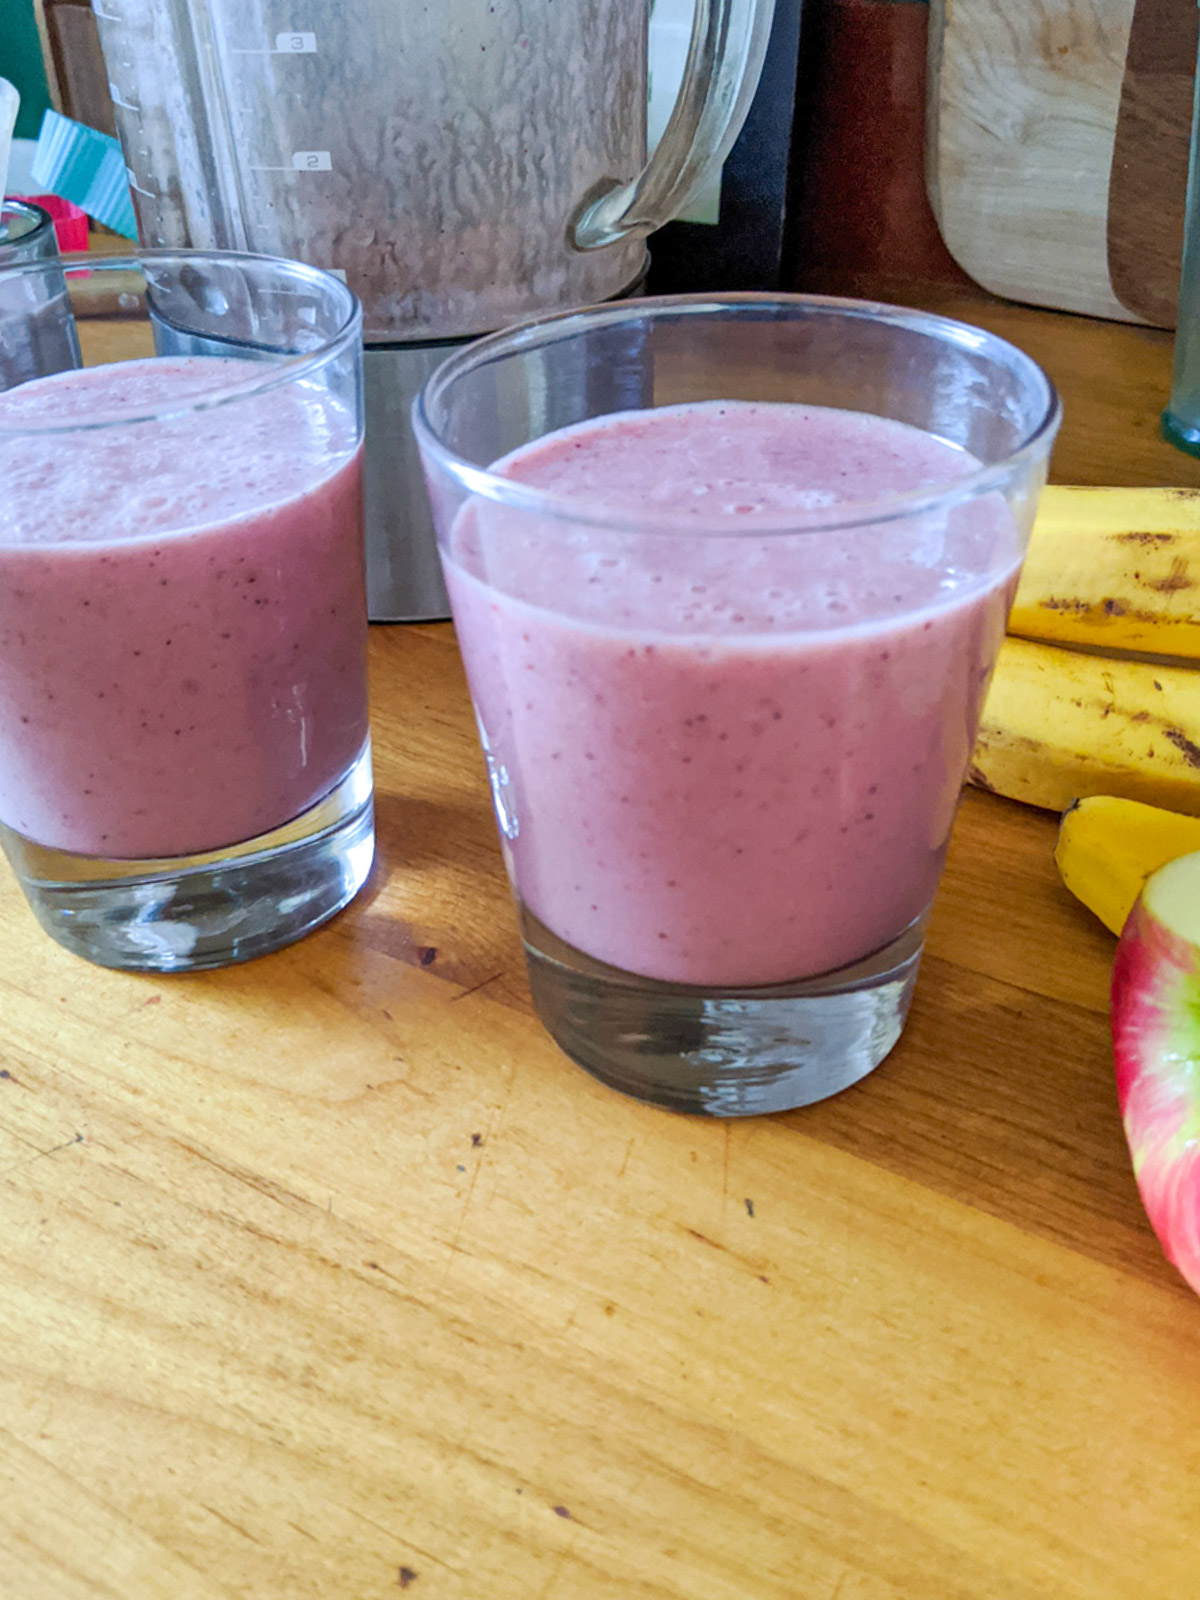 Smoothies made from leftover frozen fruit on the counter next to the blender, apple and banana.